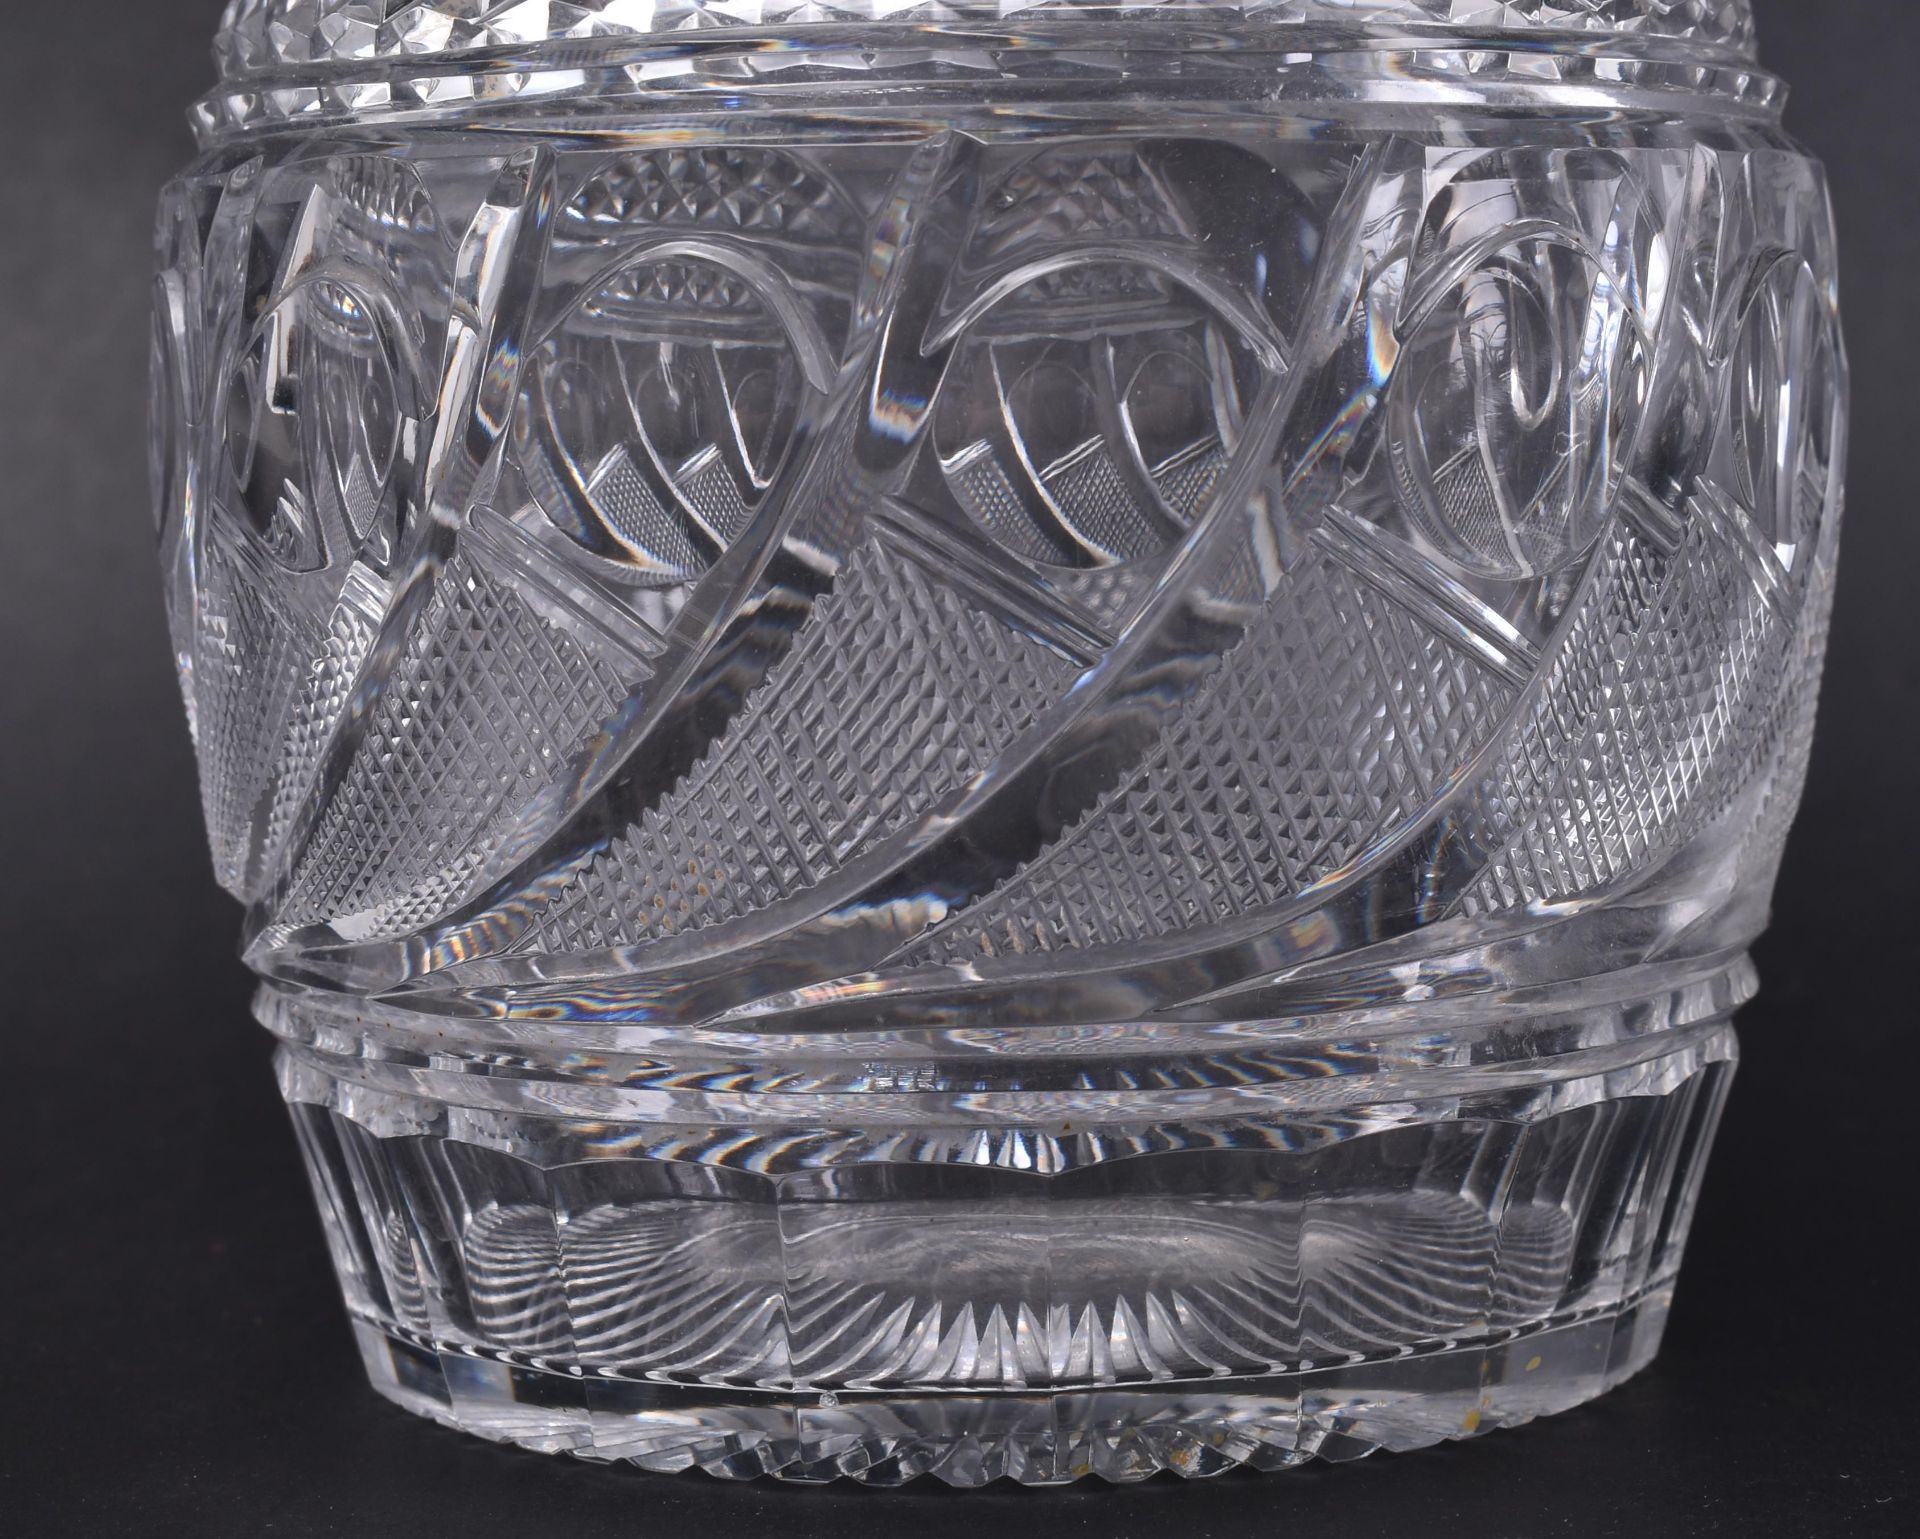 EARLY 19TH CENTURY CLARET JUG WITH 6 CUT GLASS DRAM GLASSES - Image 5 of 6